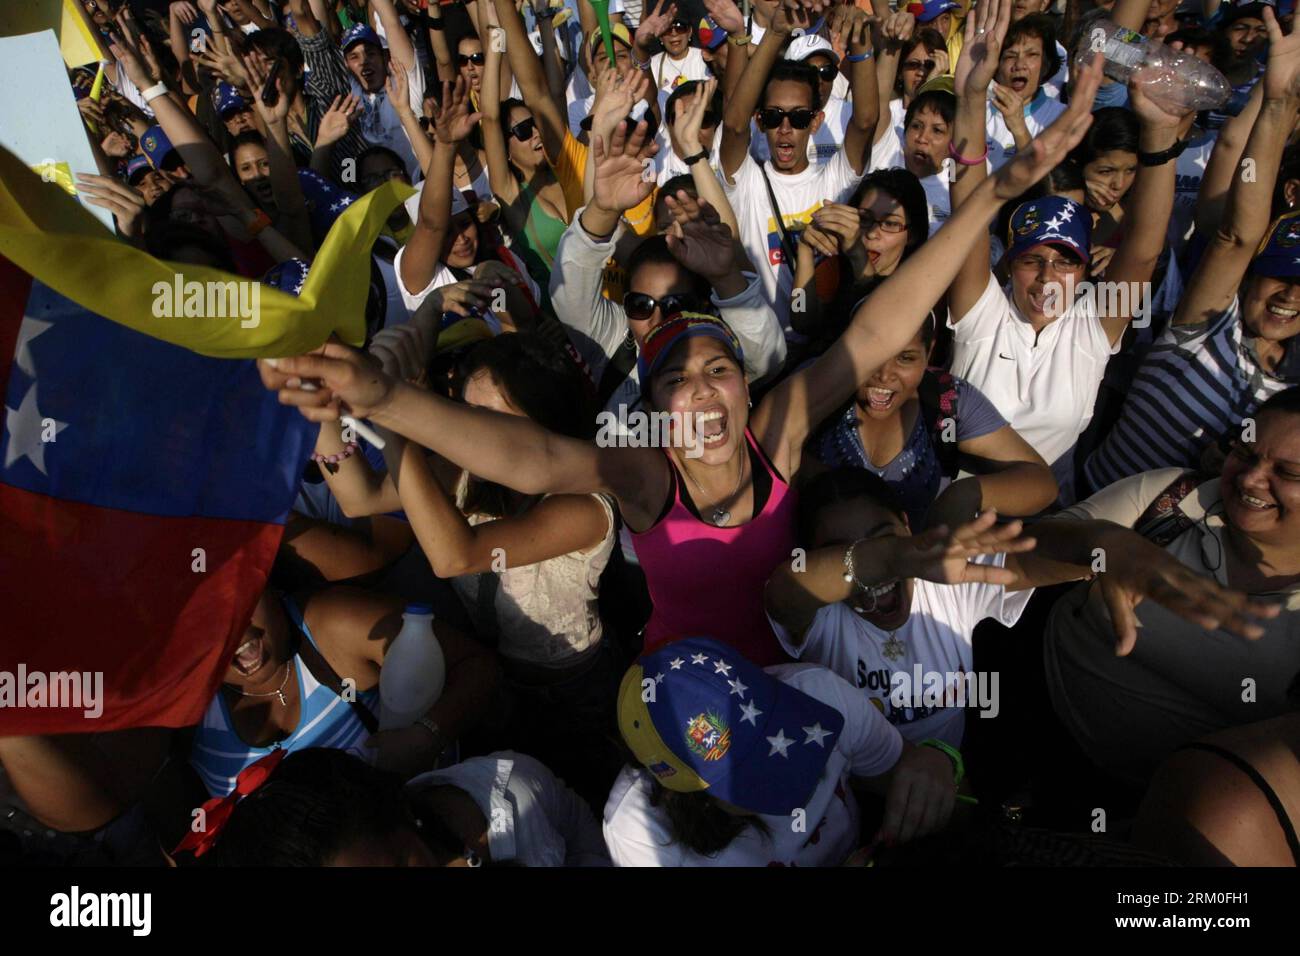 Bildnummer: 59408655  Datum: 21.03.2013  Copyright: imago/Xinhua Supporters of opposition presidential candidate Henrique Capriles attend a rally in Naguanagua of Carabobo State, Venezuela, on March 21, 2013. (Xinhua/Juan Carlos Hernandez)(ctt) VENEZUELA-NAGUANAGUA-PRESIDENTIAL ELETION-RALLY PUBLICATIONxNOTxINxCHN People xns x0x 2013 quer premiumd     59408655 Date 21 03 2013 Copyright Imago XINHUA Supporters of Opposition Presidential Candidate Henrique  attend a Rally in  of Carabobo State Venezuela ON March 21 2013 XINHUA Juan Carlos Hernandez CTT Venezuela  Presidential eletion Rally PUBLI Stock Photo